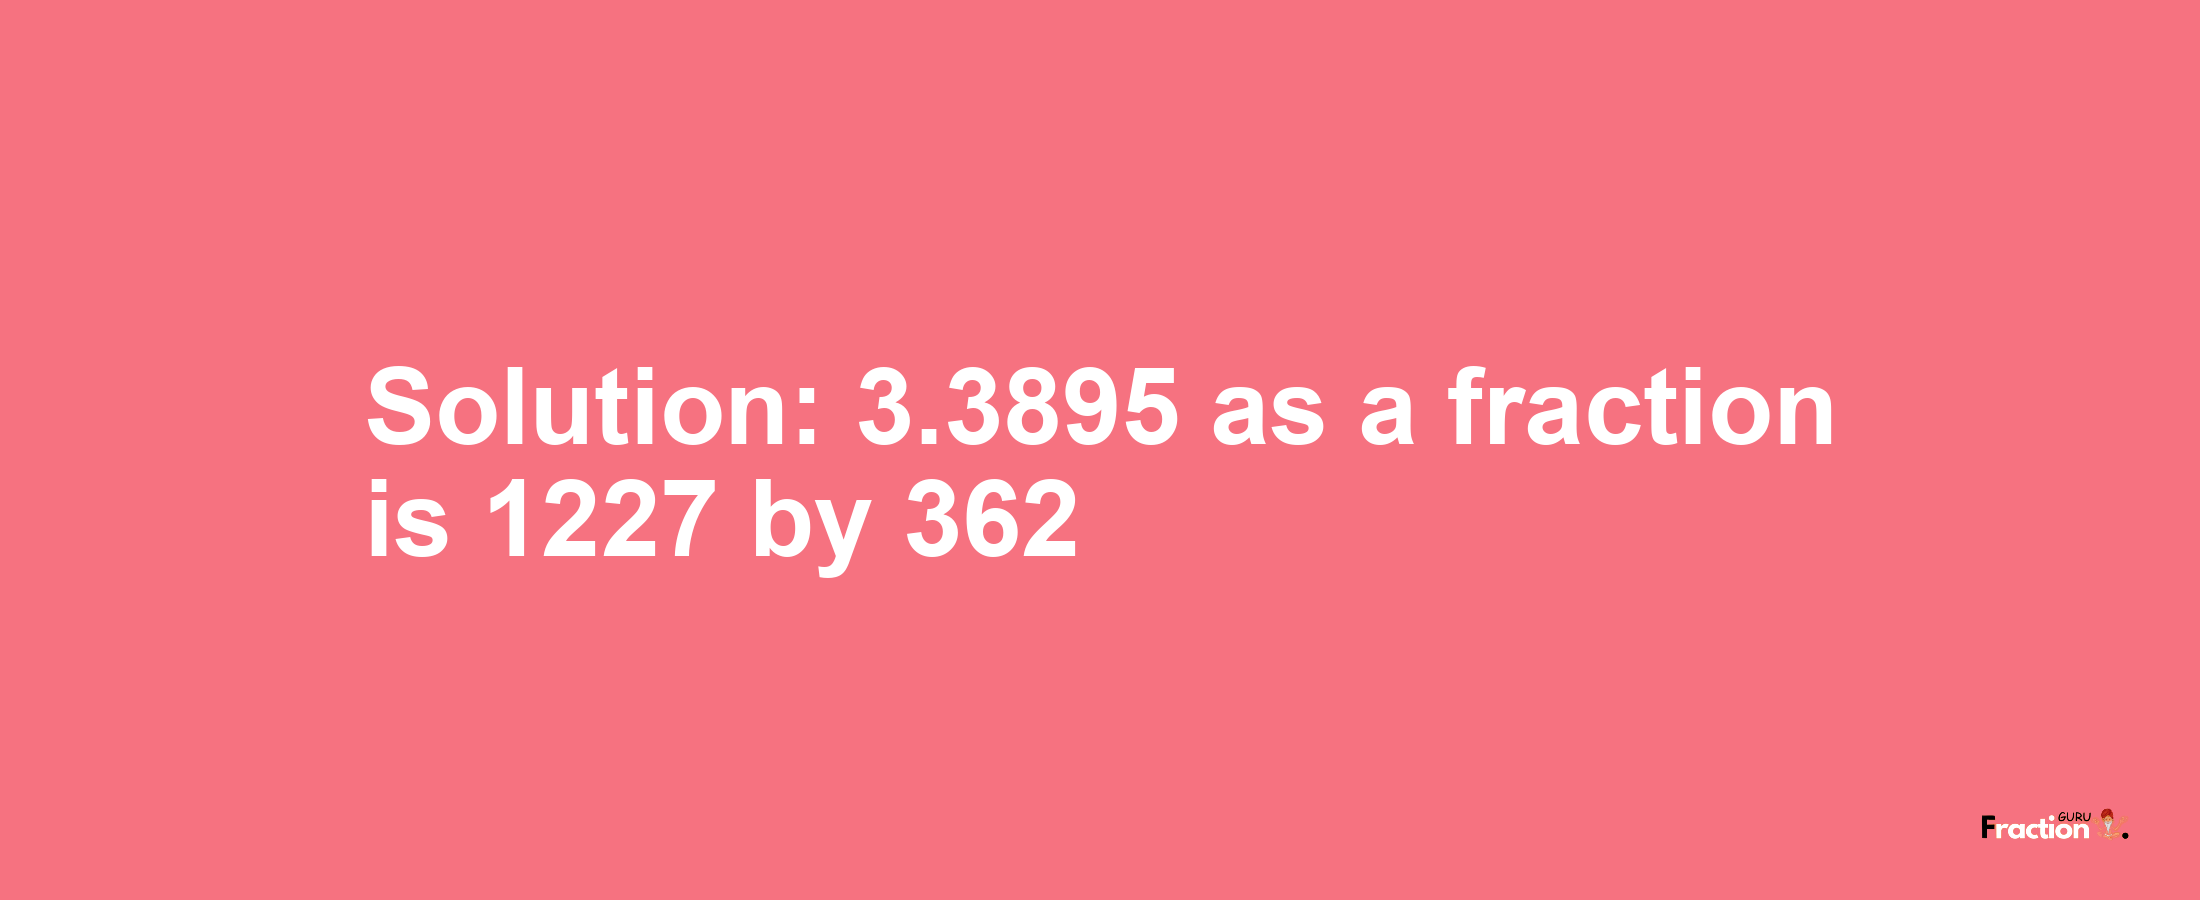 Solution:3.3895 as a fraction is 1227/362